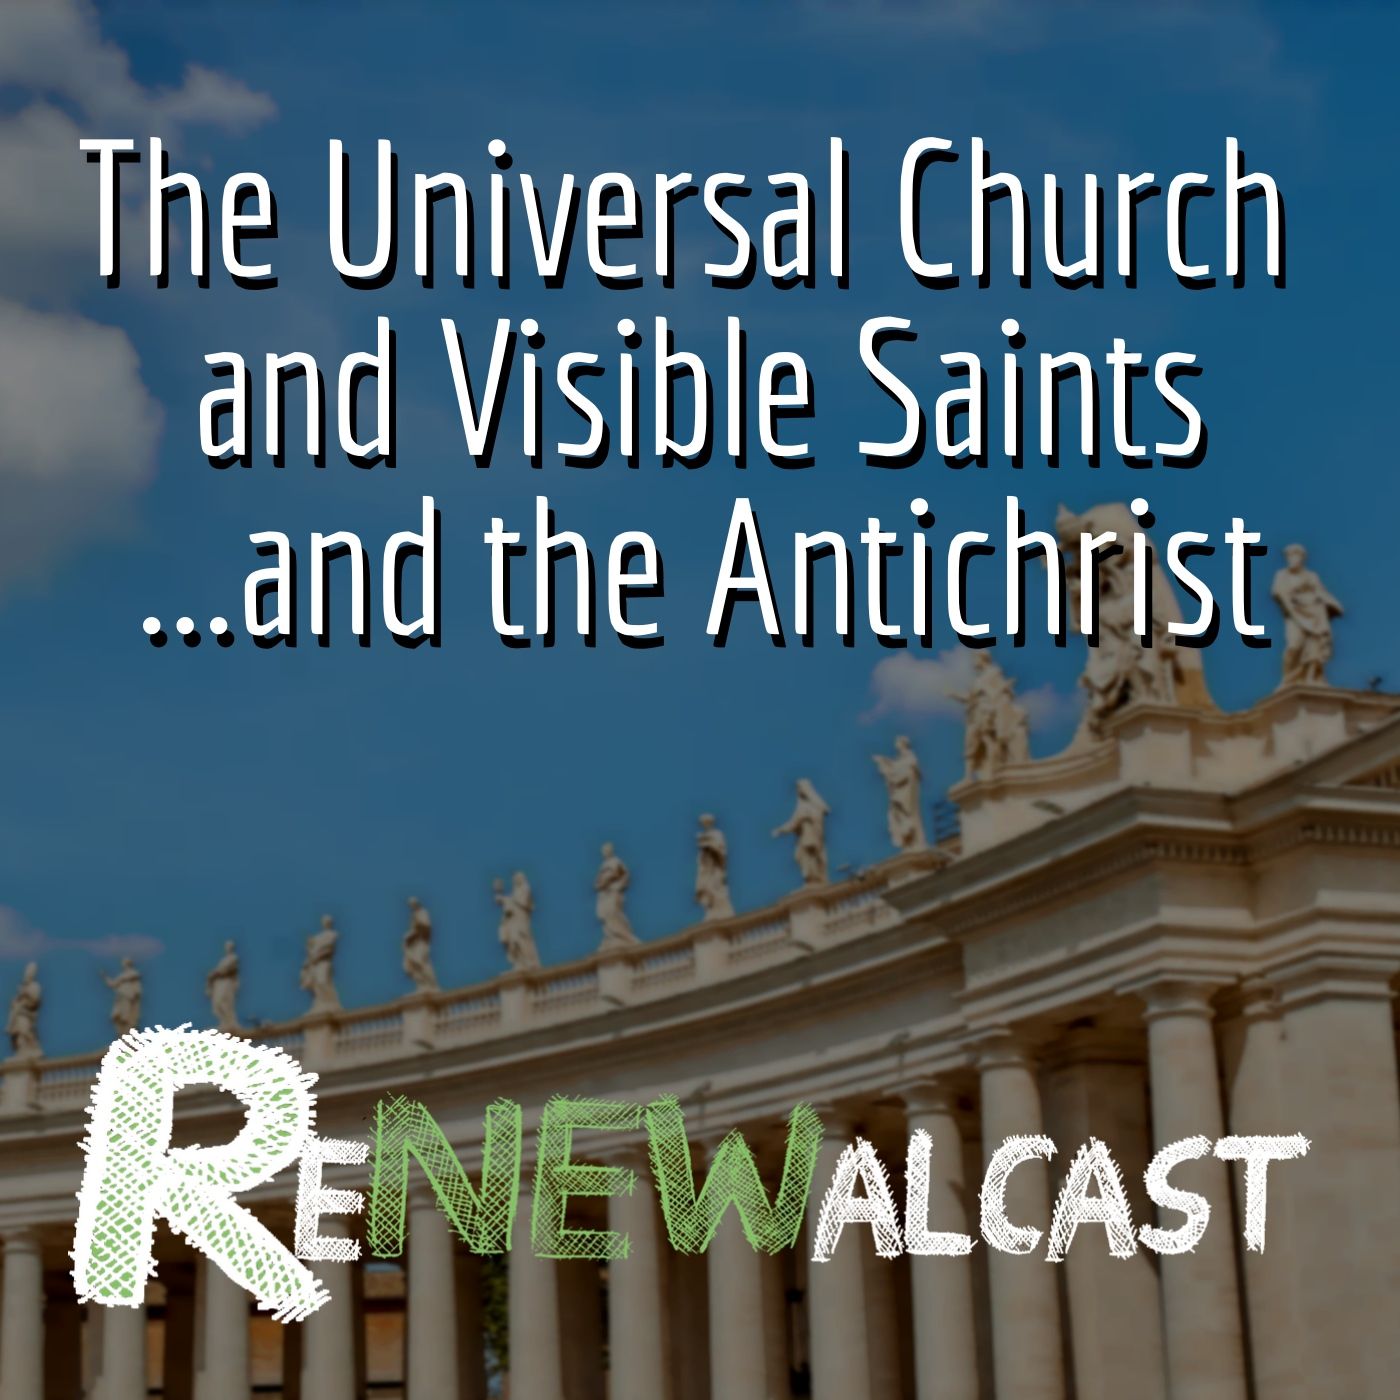 The Universal Church and Visible Saints...and the Antichrist